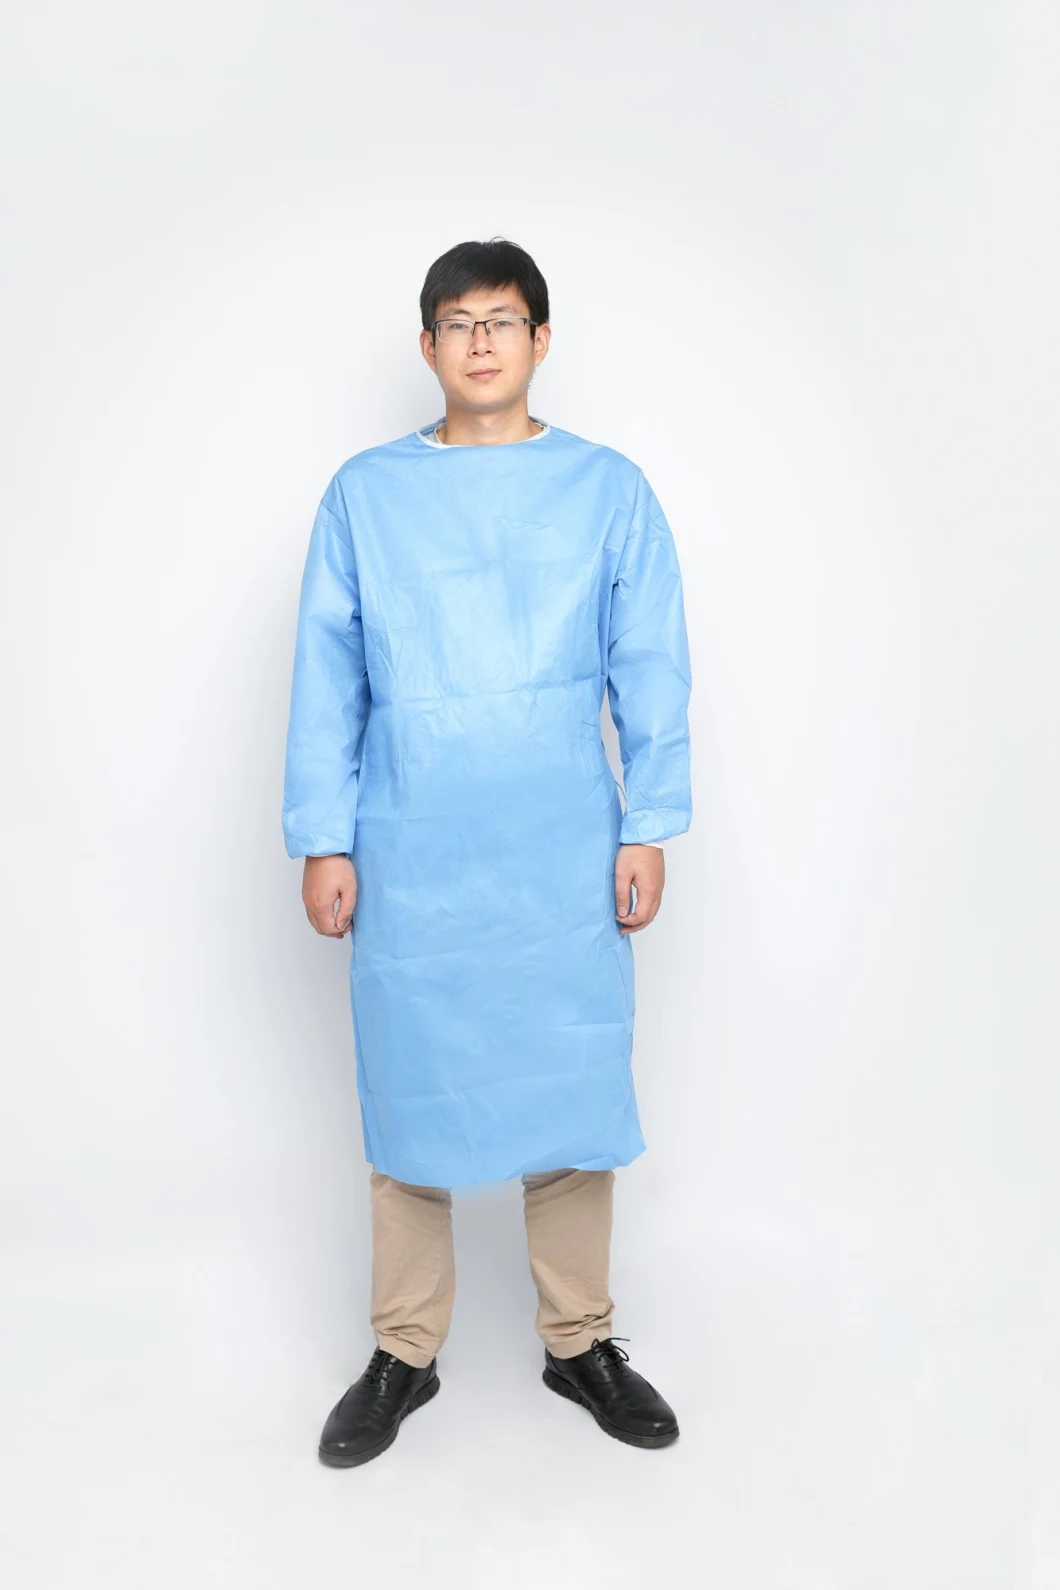 Disposable Protective Sterile Coverall Surgical Clothing Gowns Work Operation Gown Apron Surgical Hospital Lab Coat